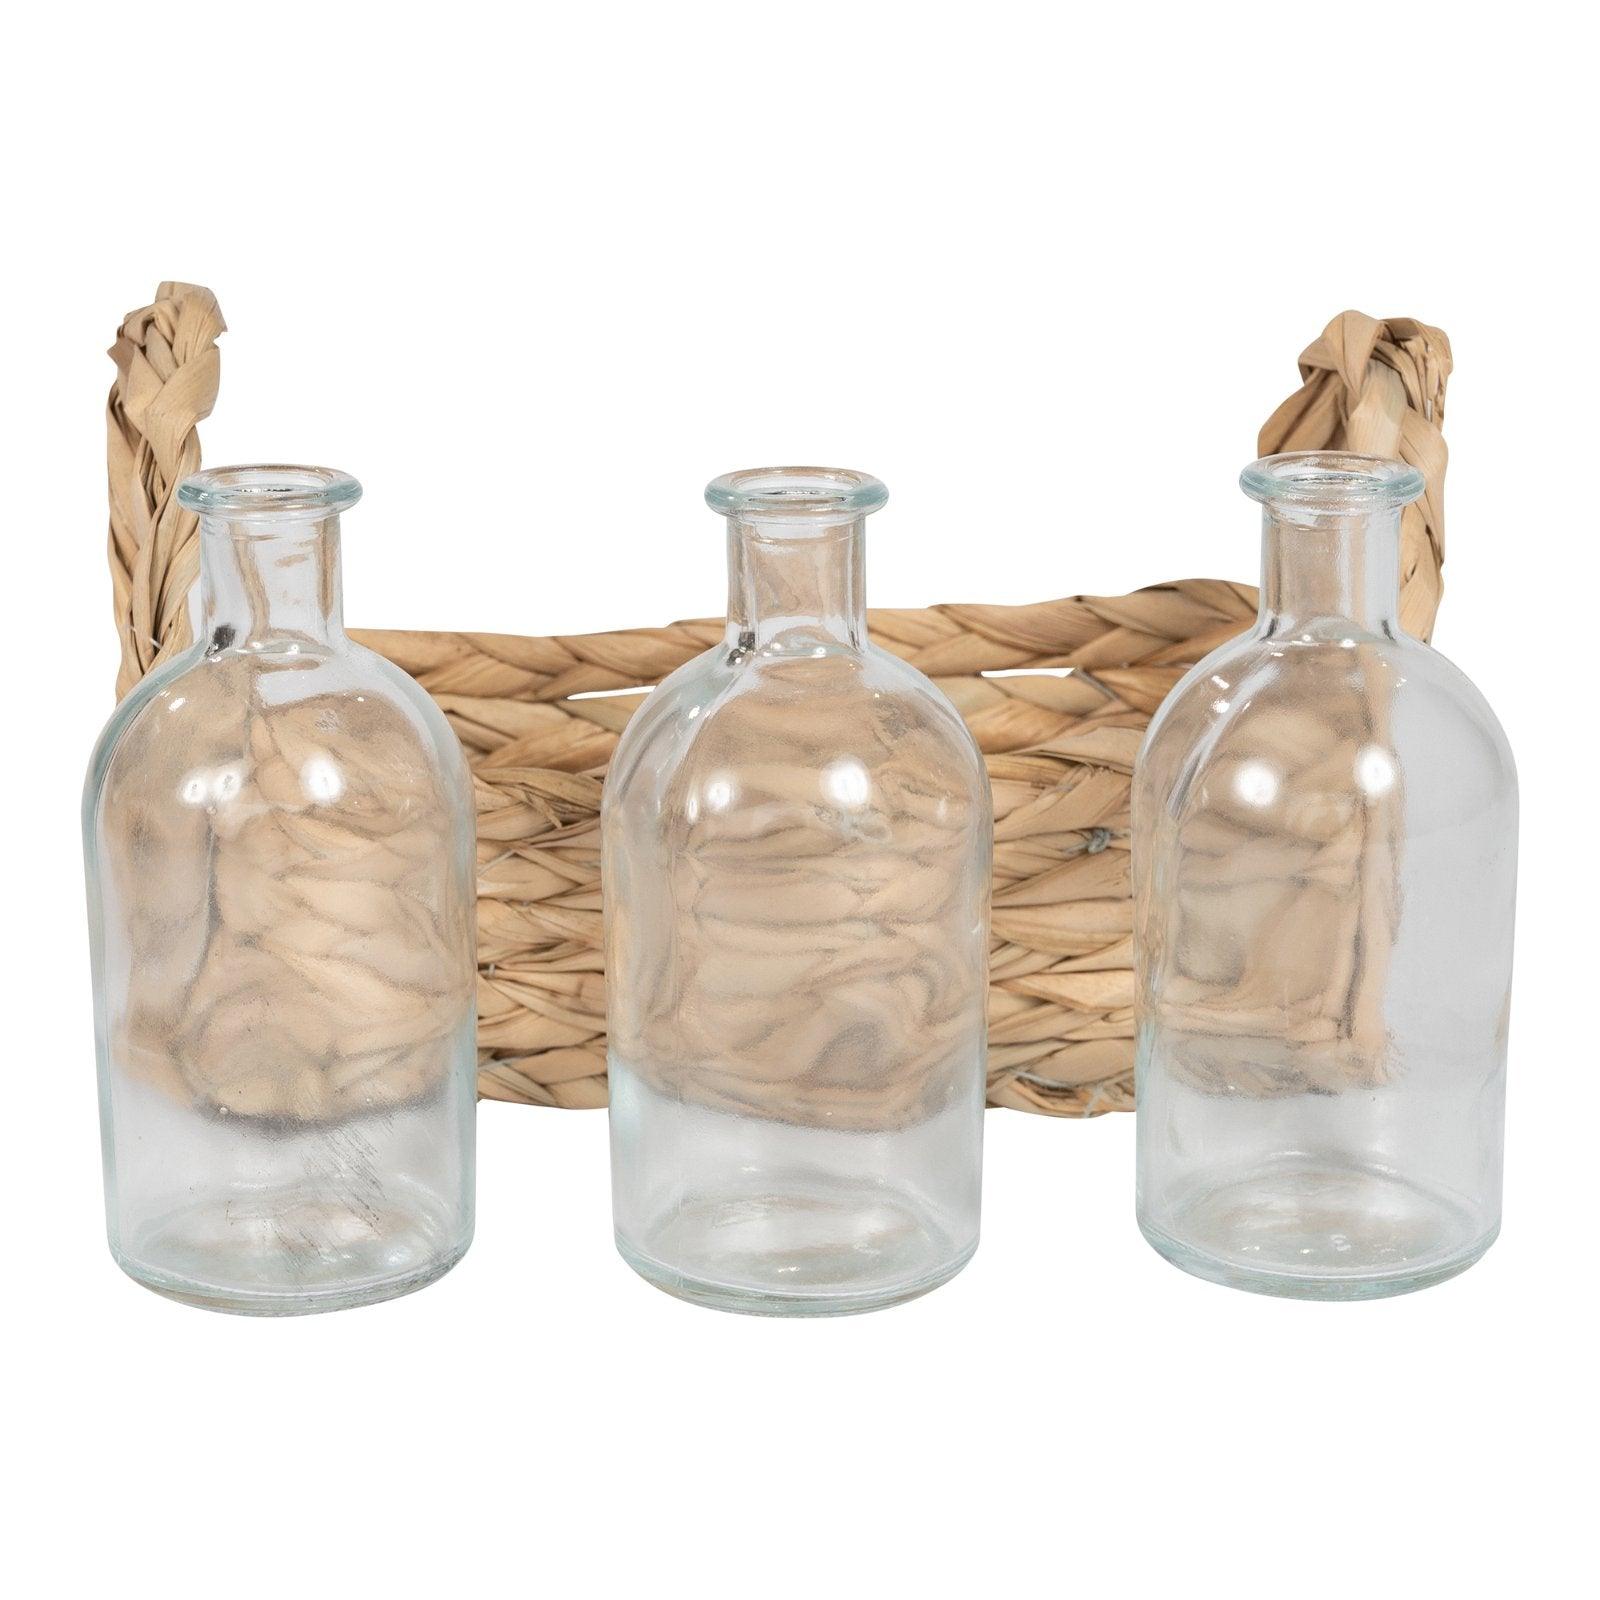 Set of 3 Vases With Grass Tray - £26.99 - Planters, Vases & Plant Stands 